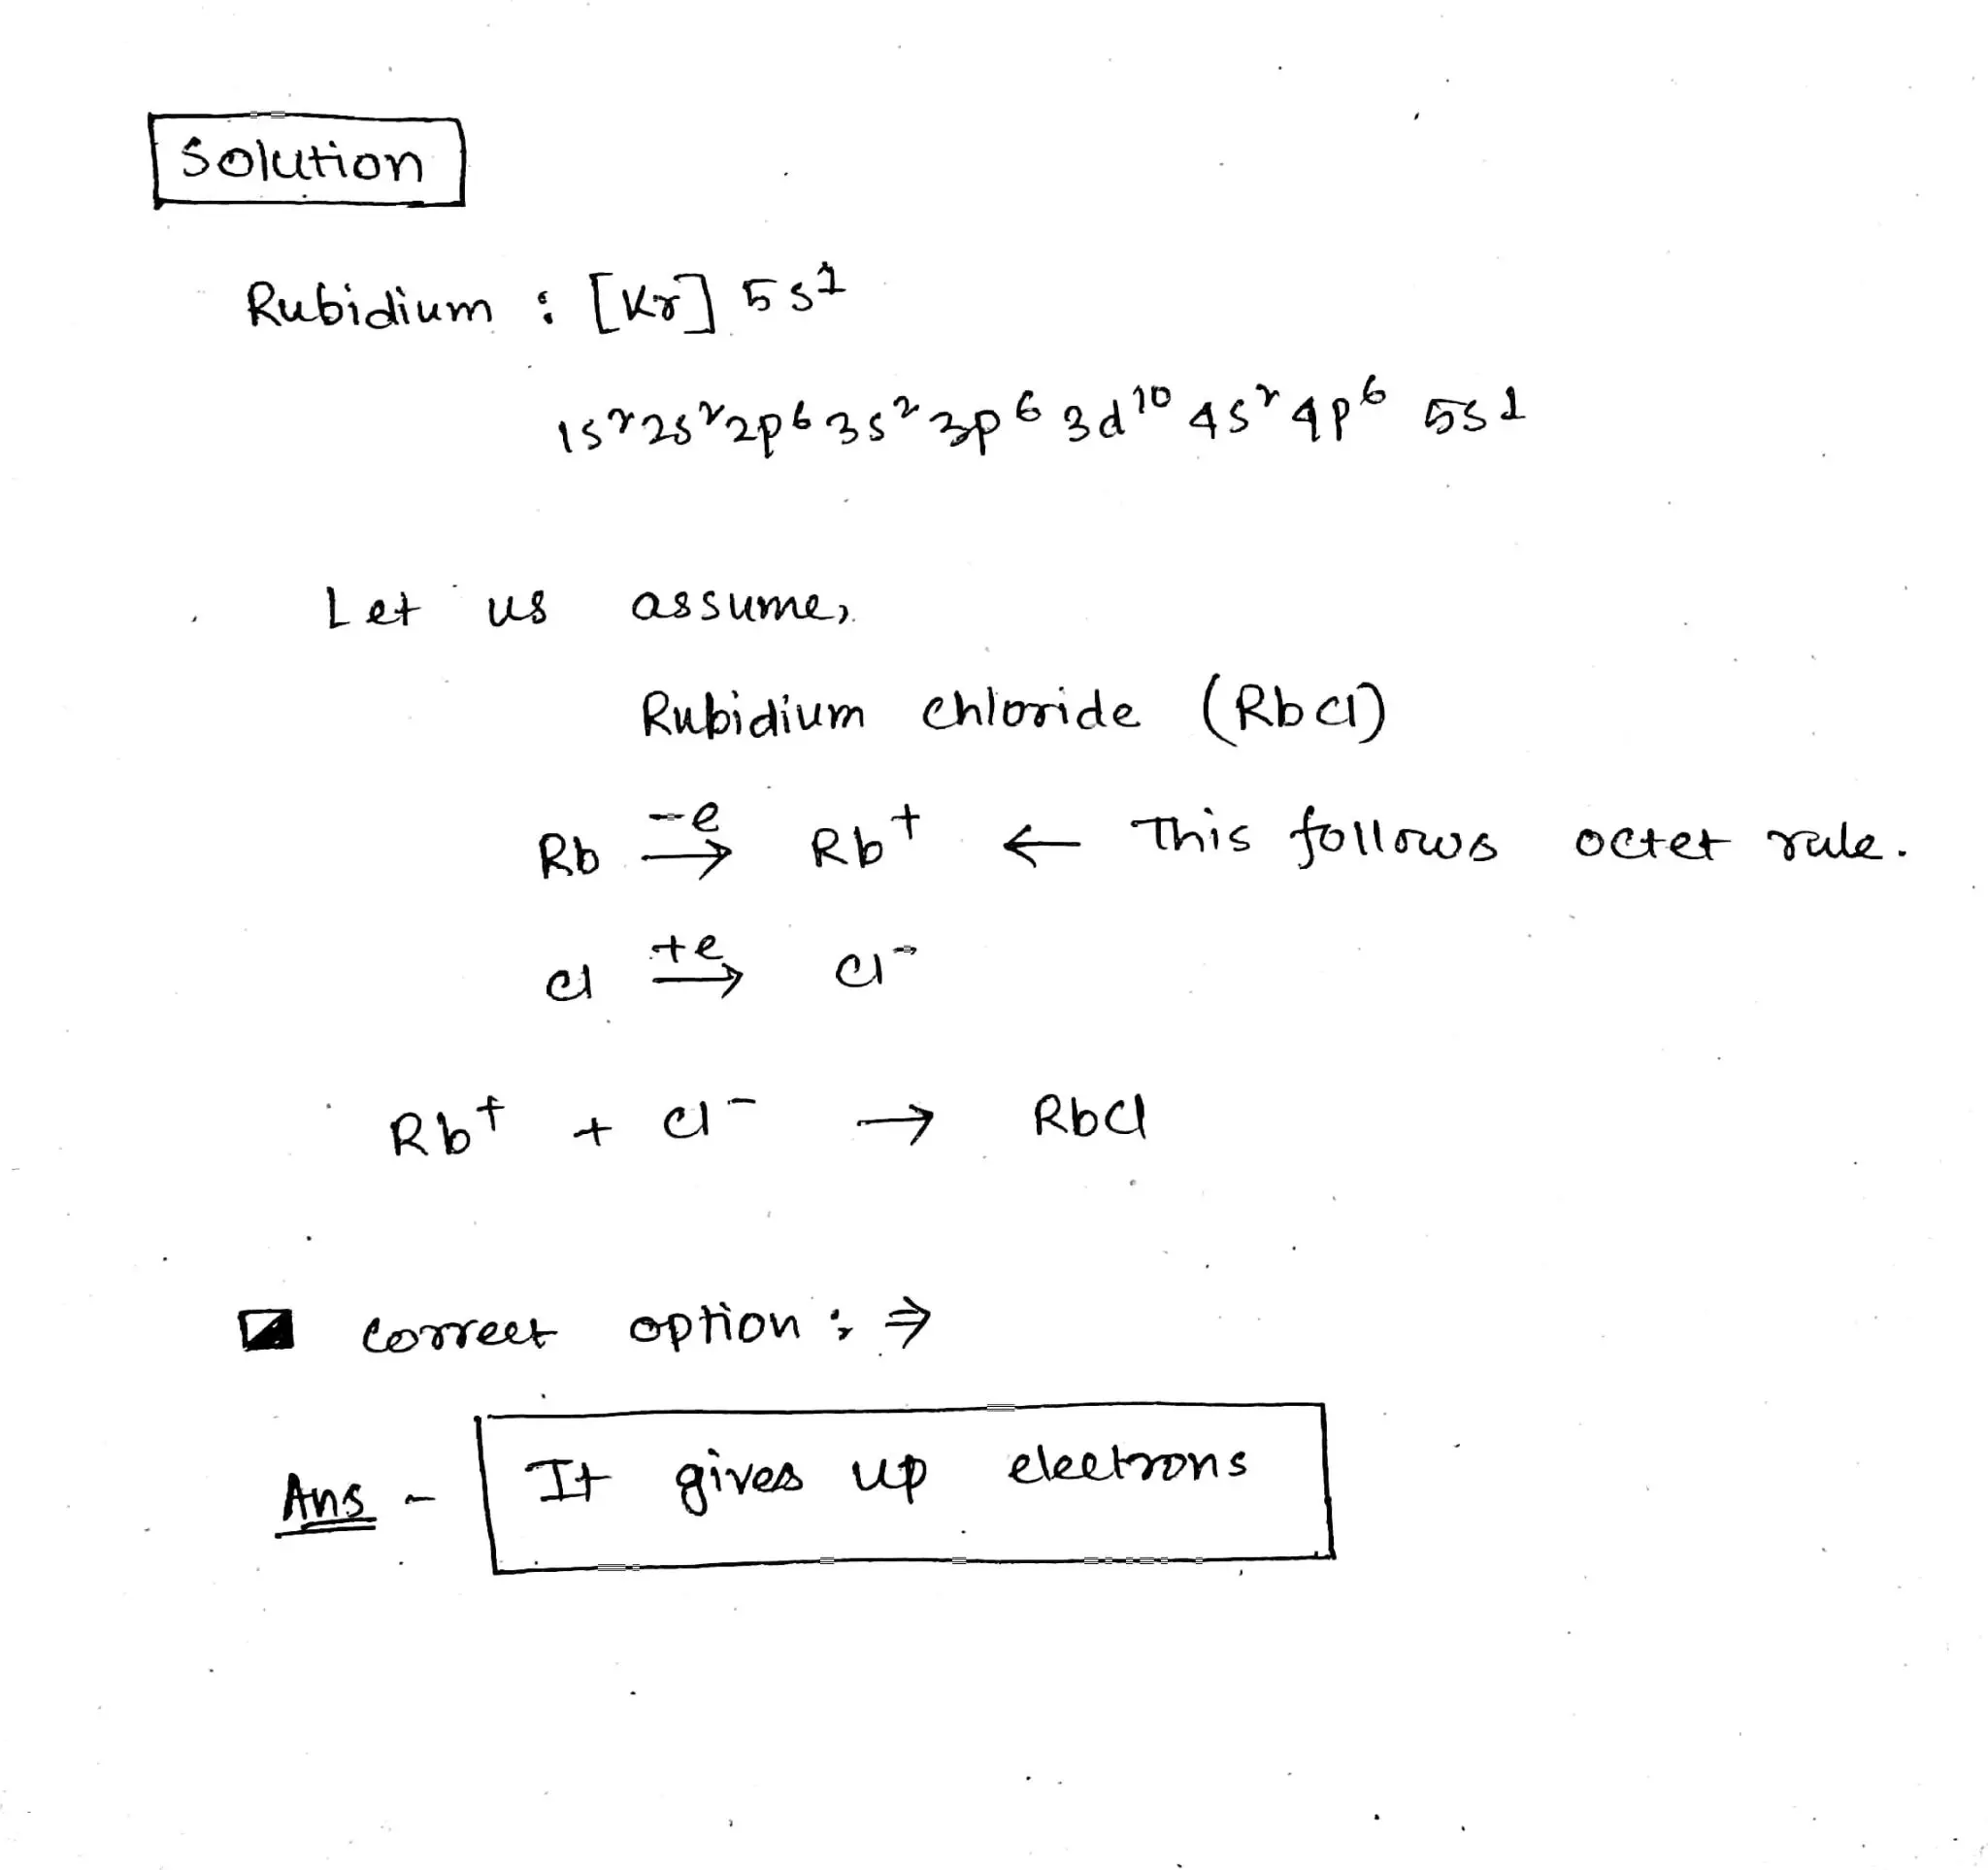 How does rubidium obey the octet rule when reacting to form
compounds?
choose below:
Calcium does not obey the octet rule.
It does not change its number of electrons.
It gives up electrons. 
It gains electrons.